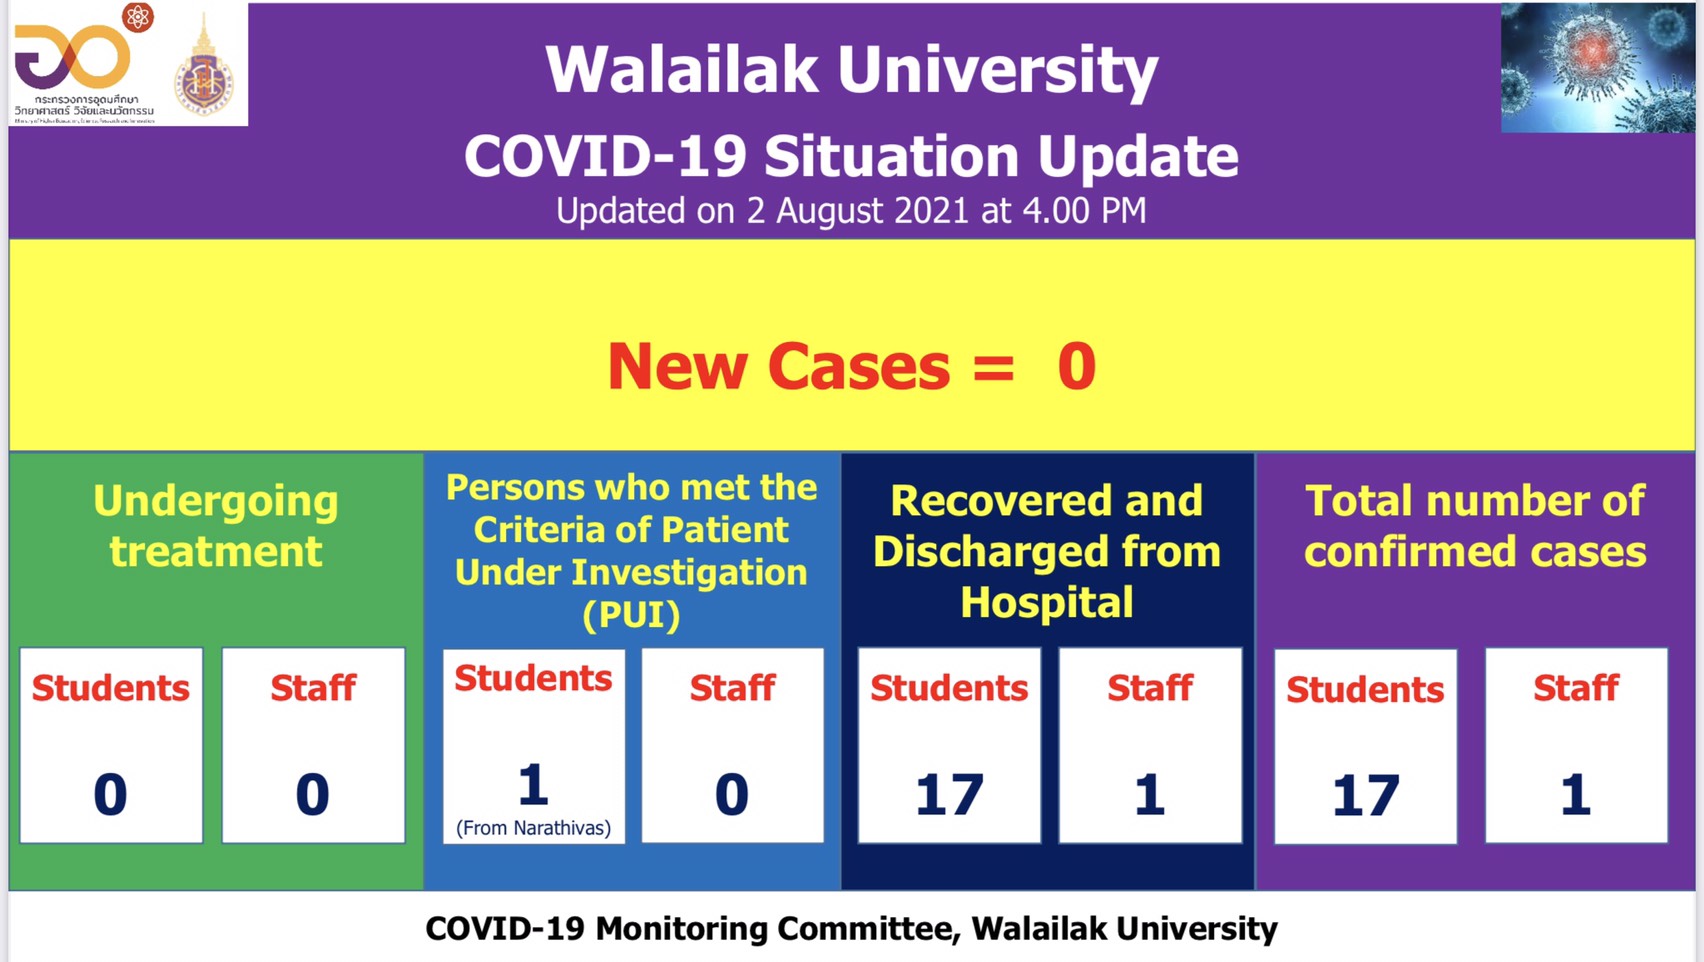 Covid-19 Situation Report of Walailak University - 2 August, 2021